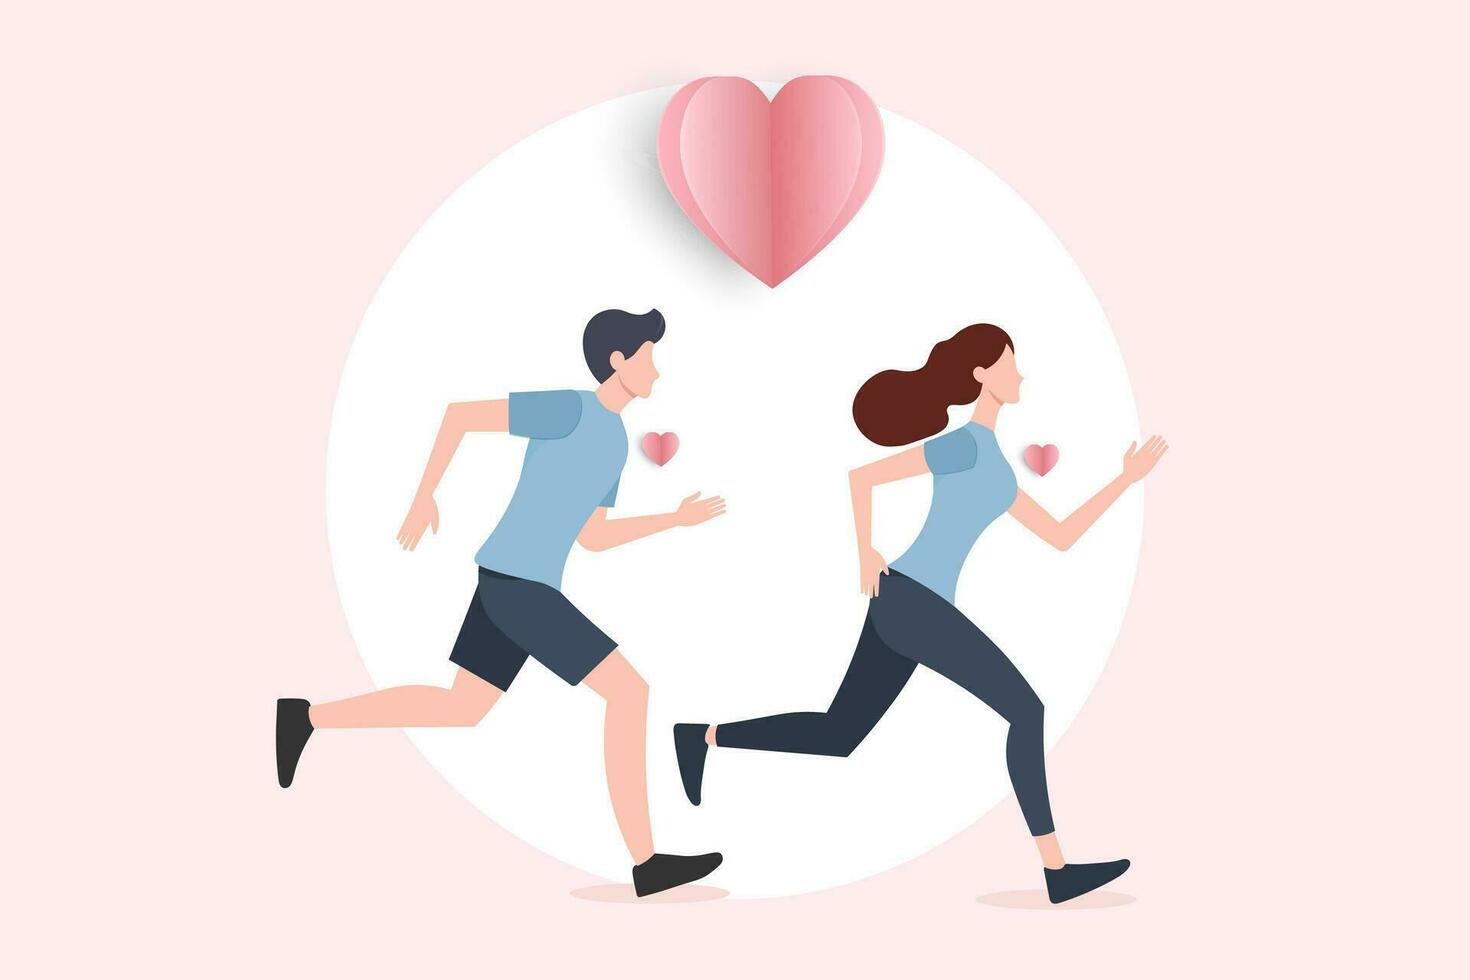 Cute couple in love running exercise with hearts floating, falling in love,love sharing, sweetheart, lover in actions of happiness, on white background. Vector illustration.